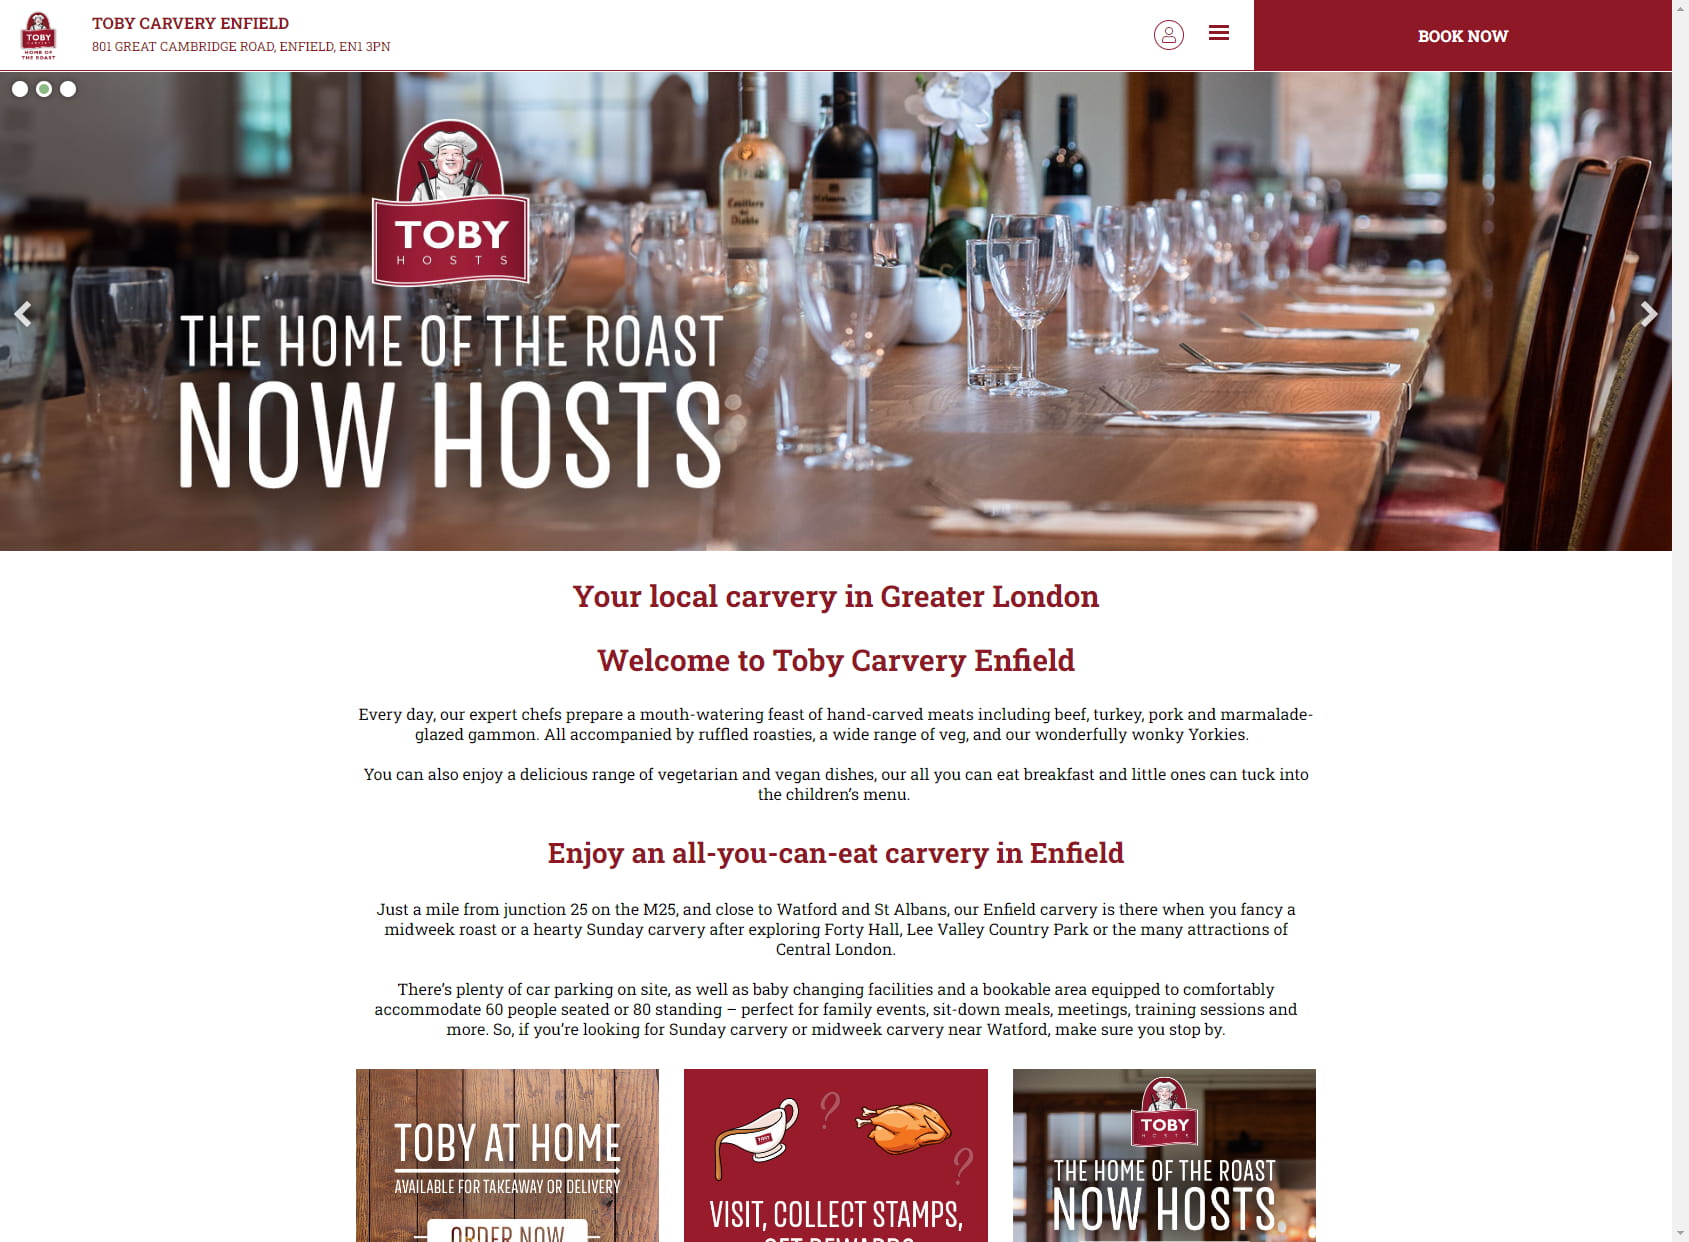 Toby Carvery Enfield